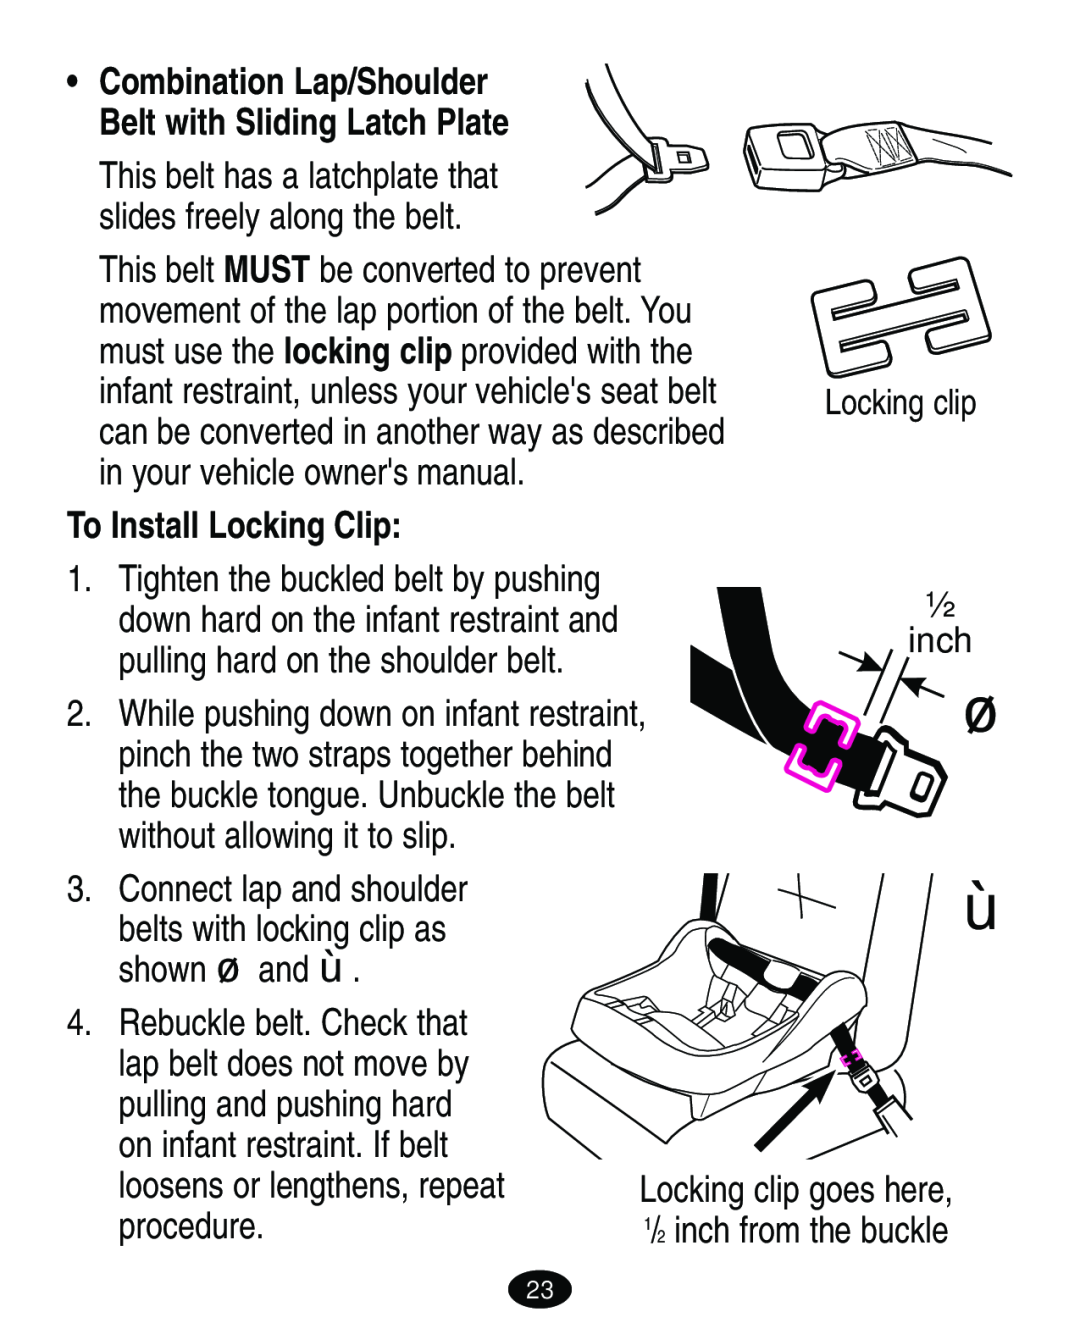 Graco 4460402 To Install Locking Clip, in your vehicle owners manual 